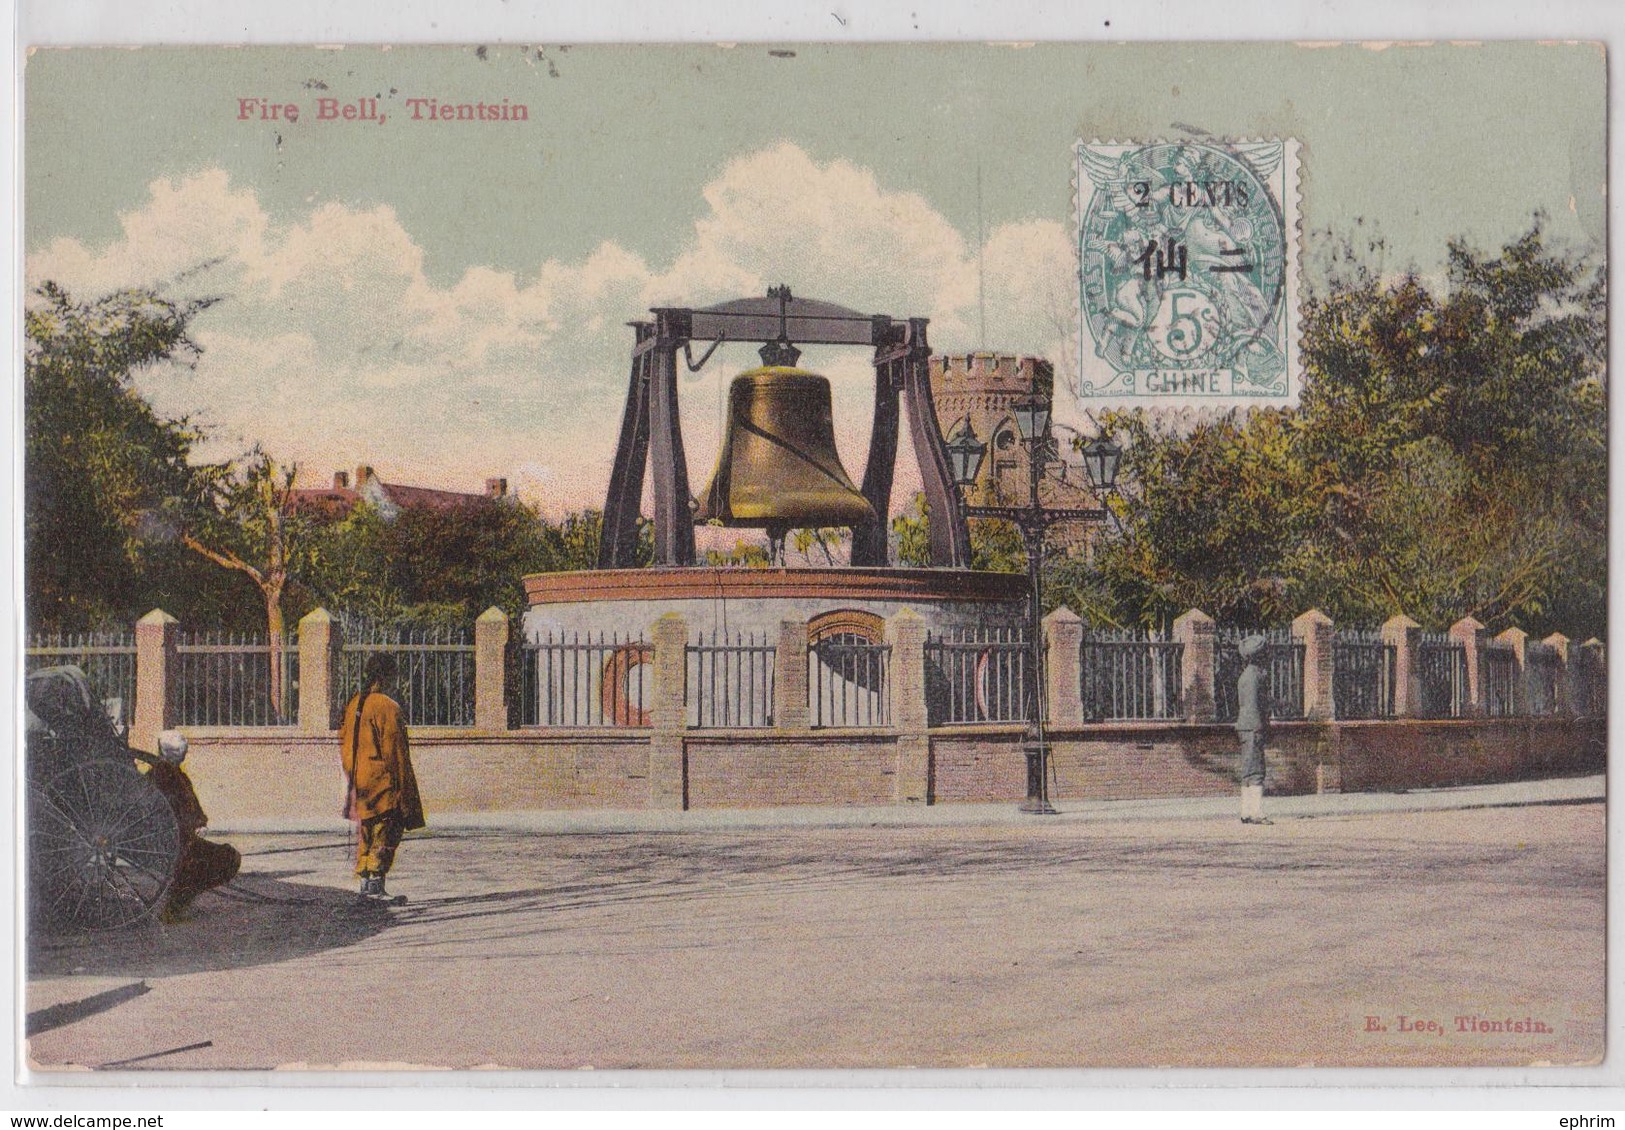 Tientsin Fire Bell Affranchissement Timbre Colonie Poste Française Chine China Stamp Cancellation - China